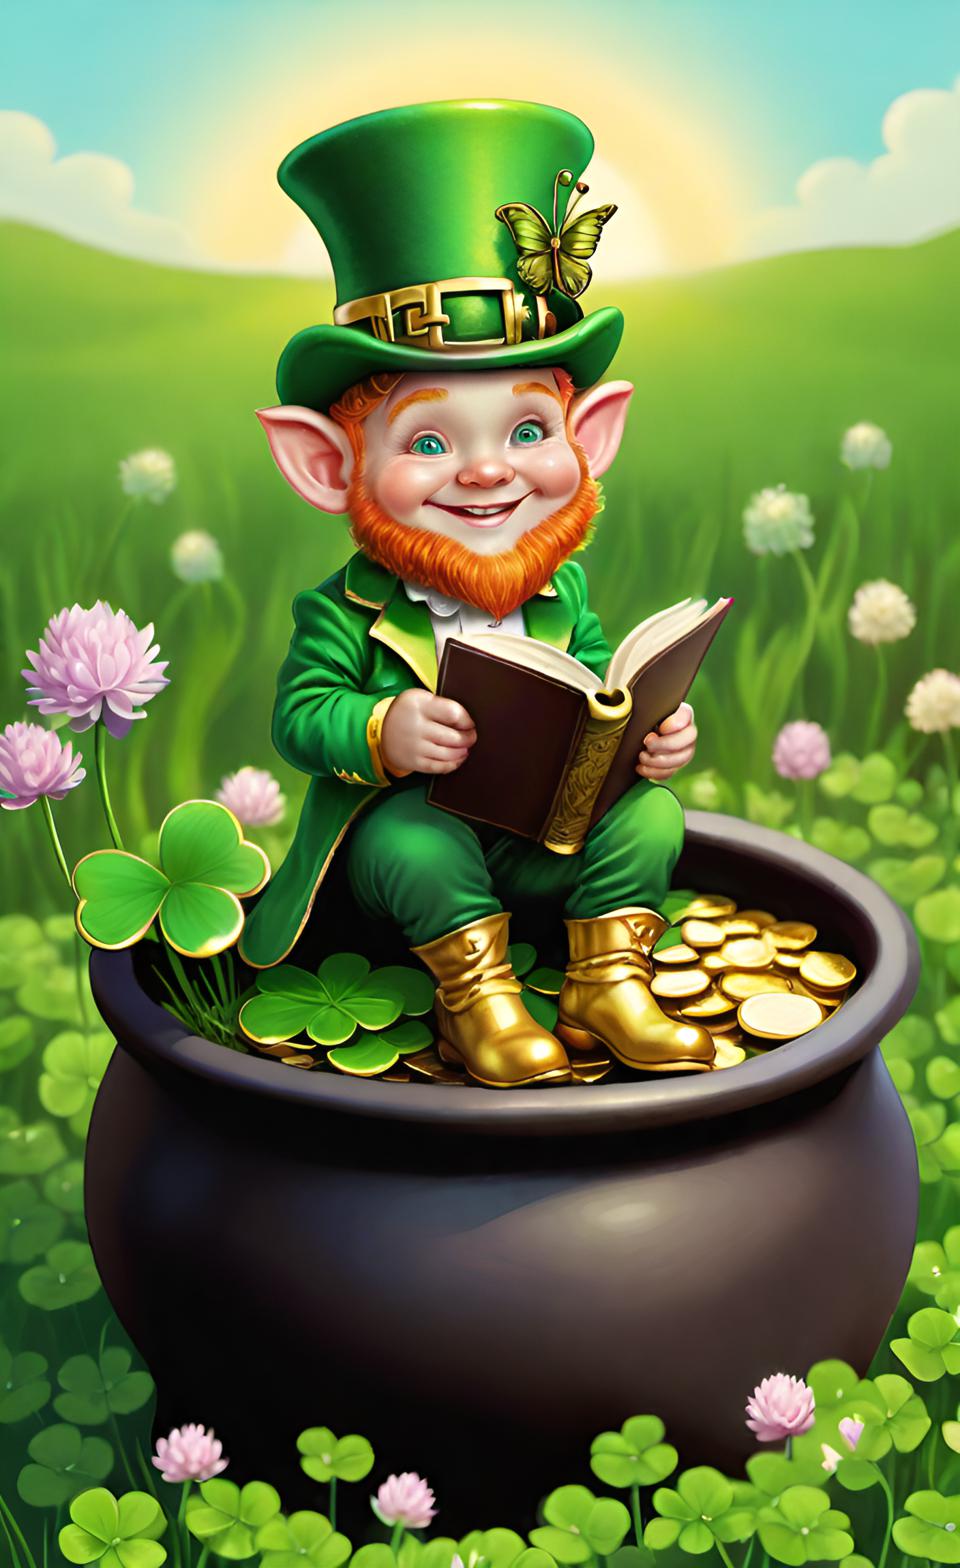 Leprechaun sitting on a pot of gold reading a book in a field of clover.